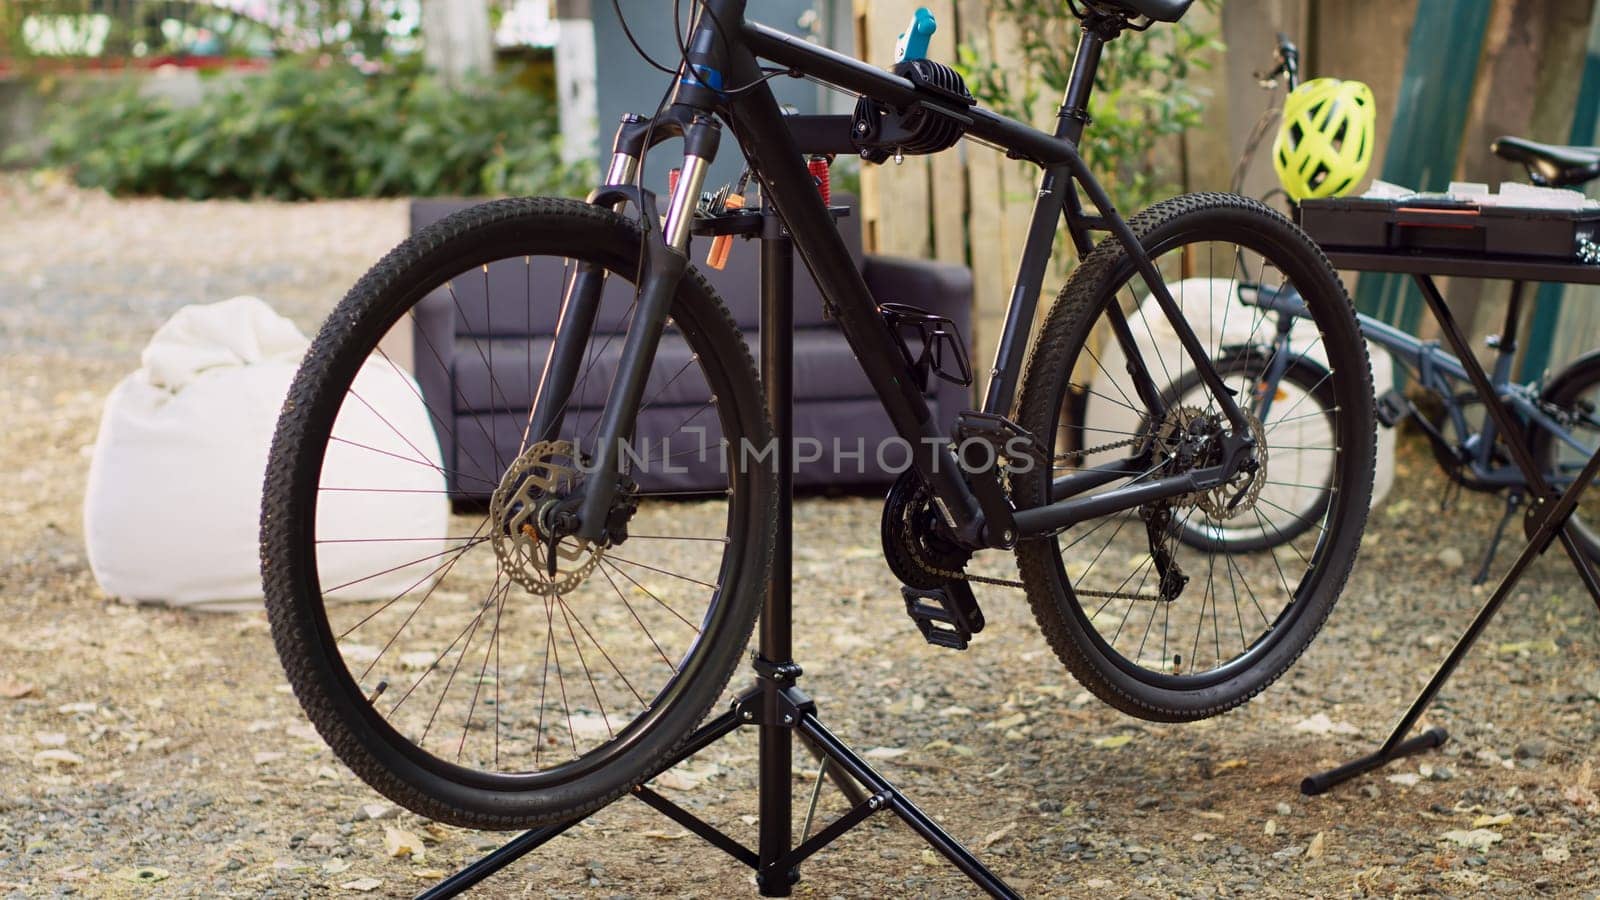 Modern bicycle is visible in the yard positioned on repair-stand for examining and mending. Outdoor various bike components await adjustments and restoration with professional work tools.